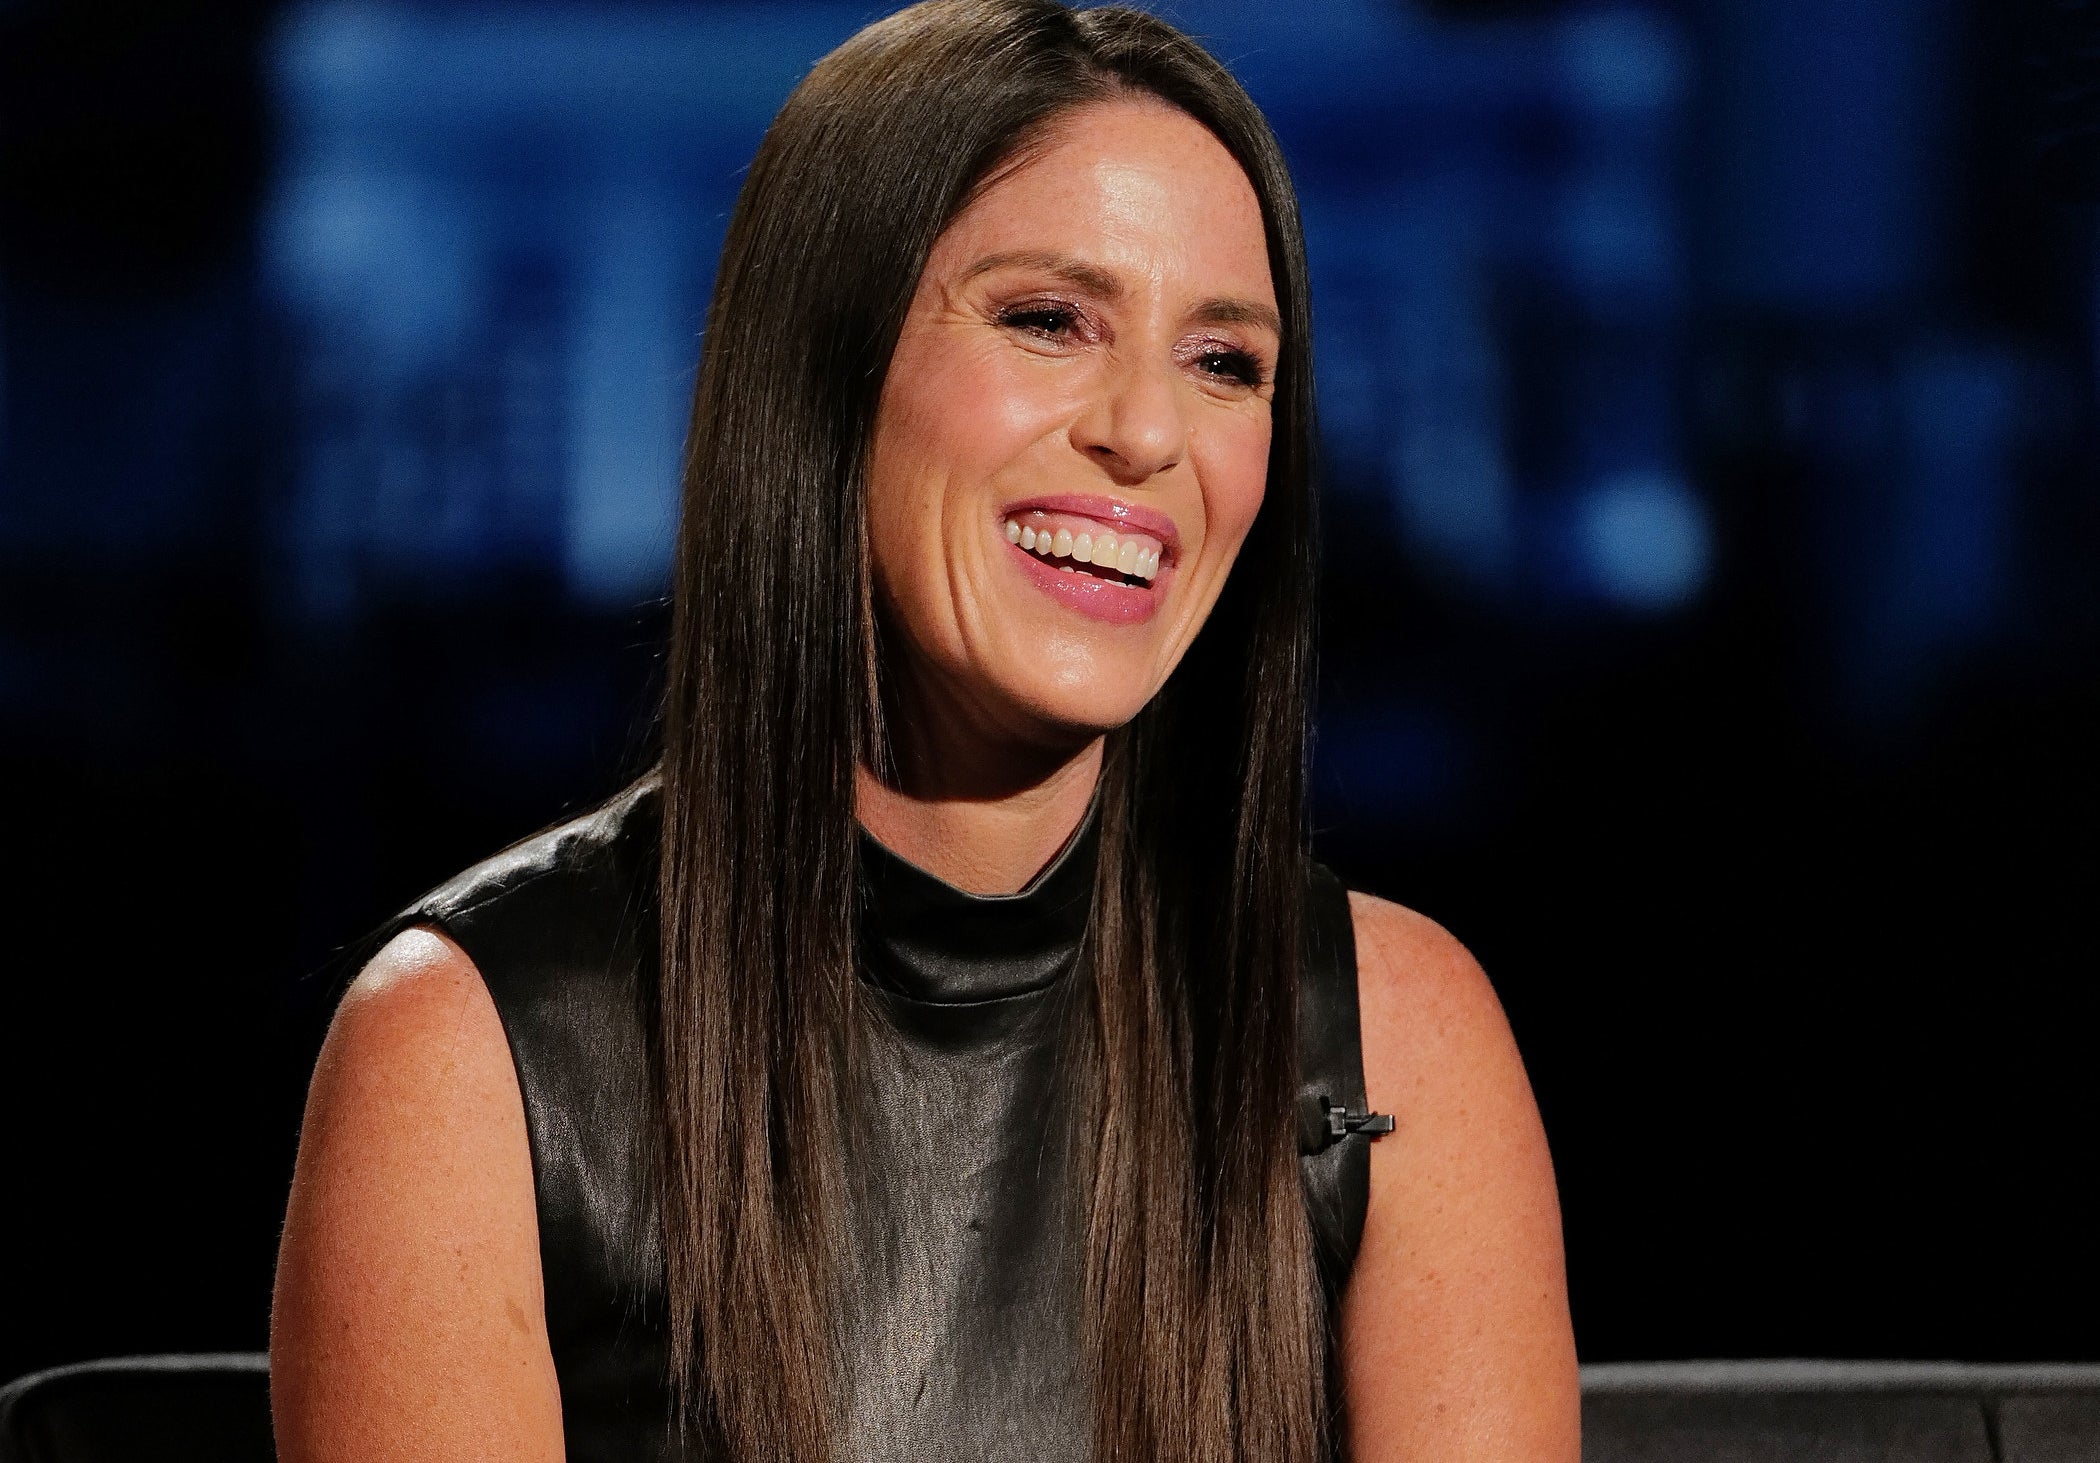 Soleil Moon Frye smiles while seated on stage.